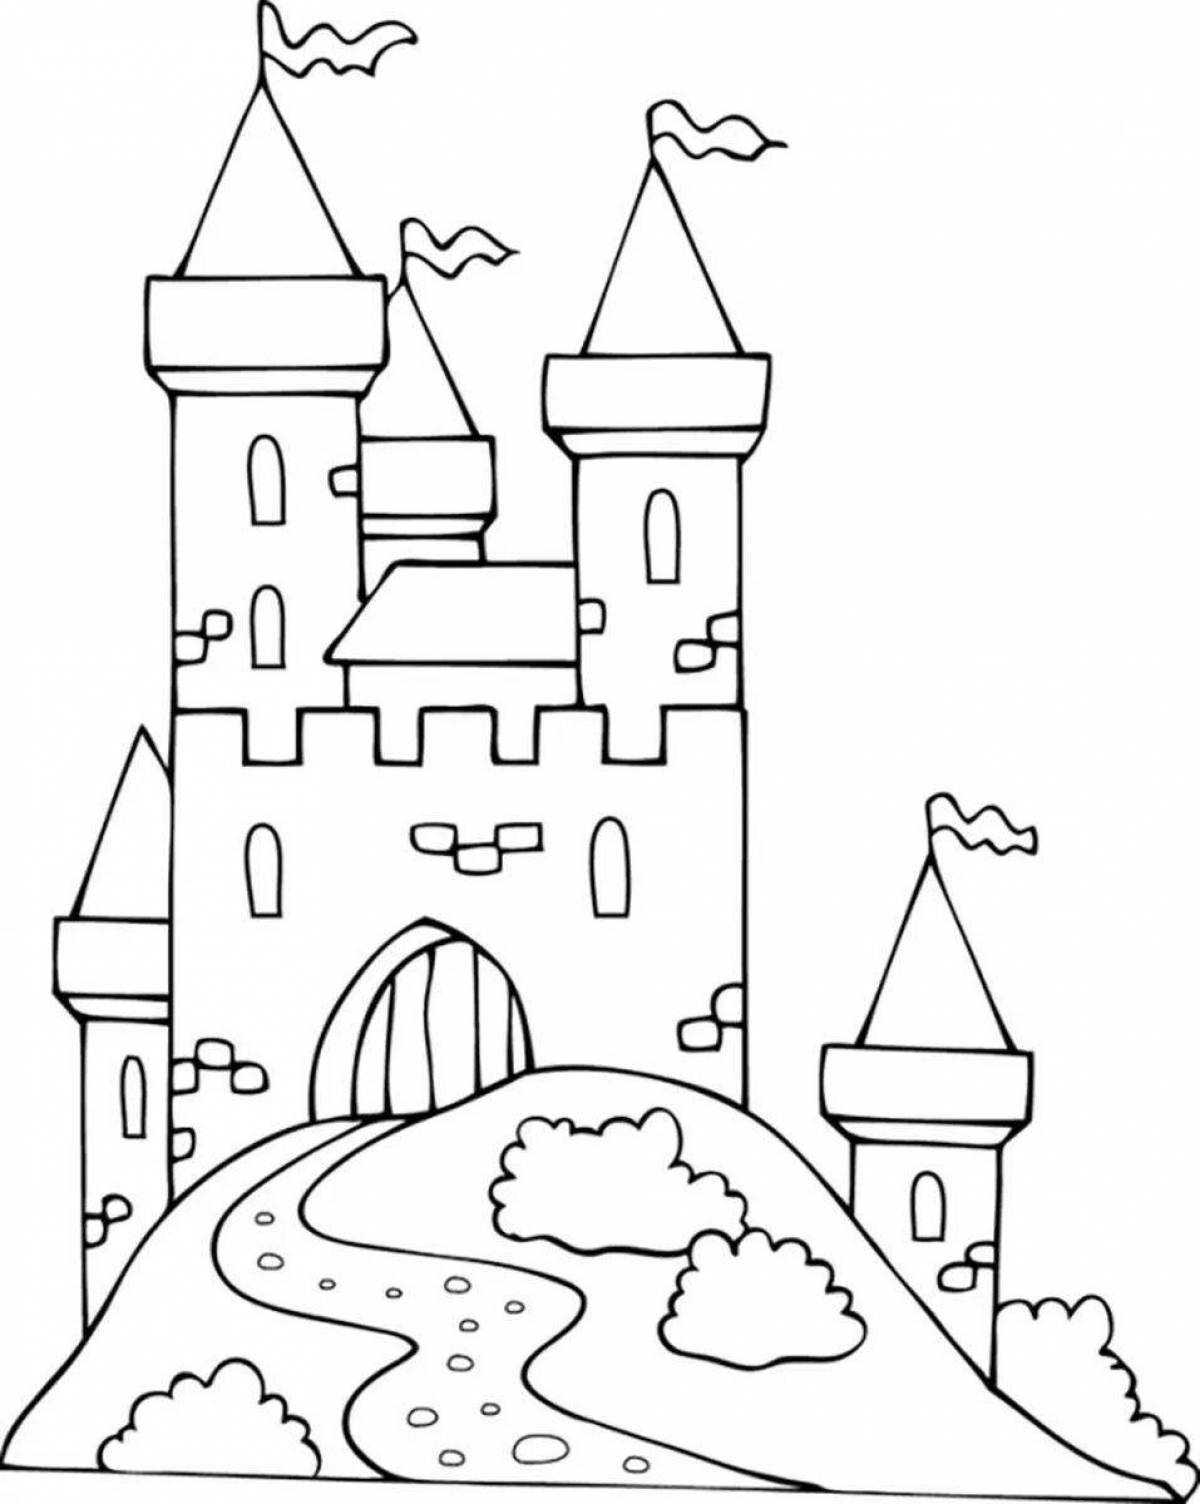 Great castle coloring book